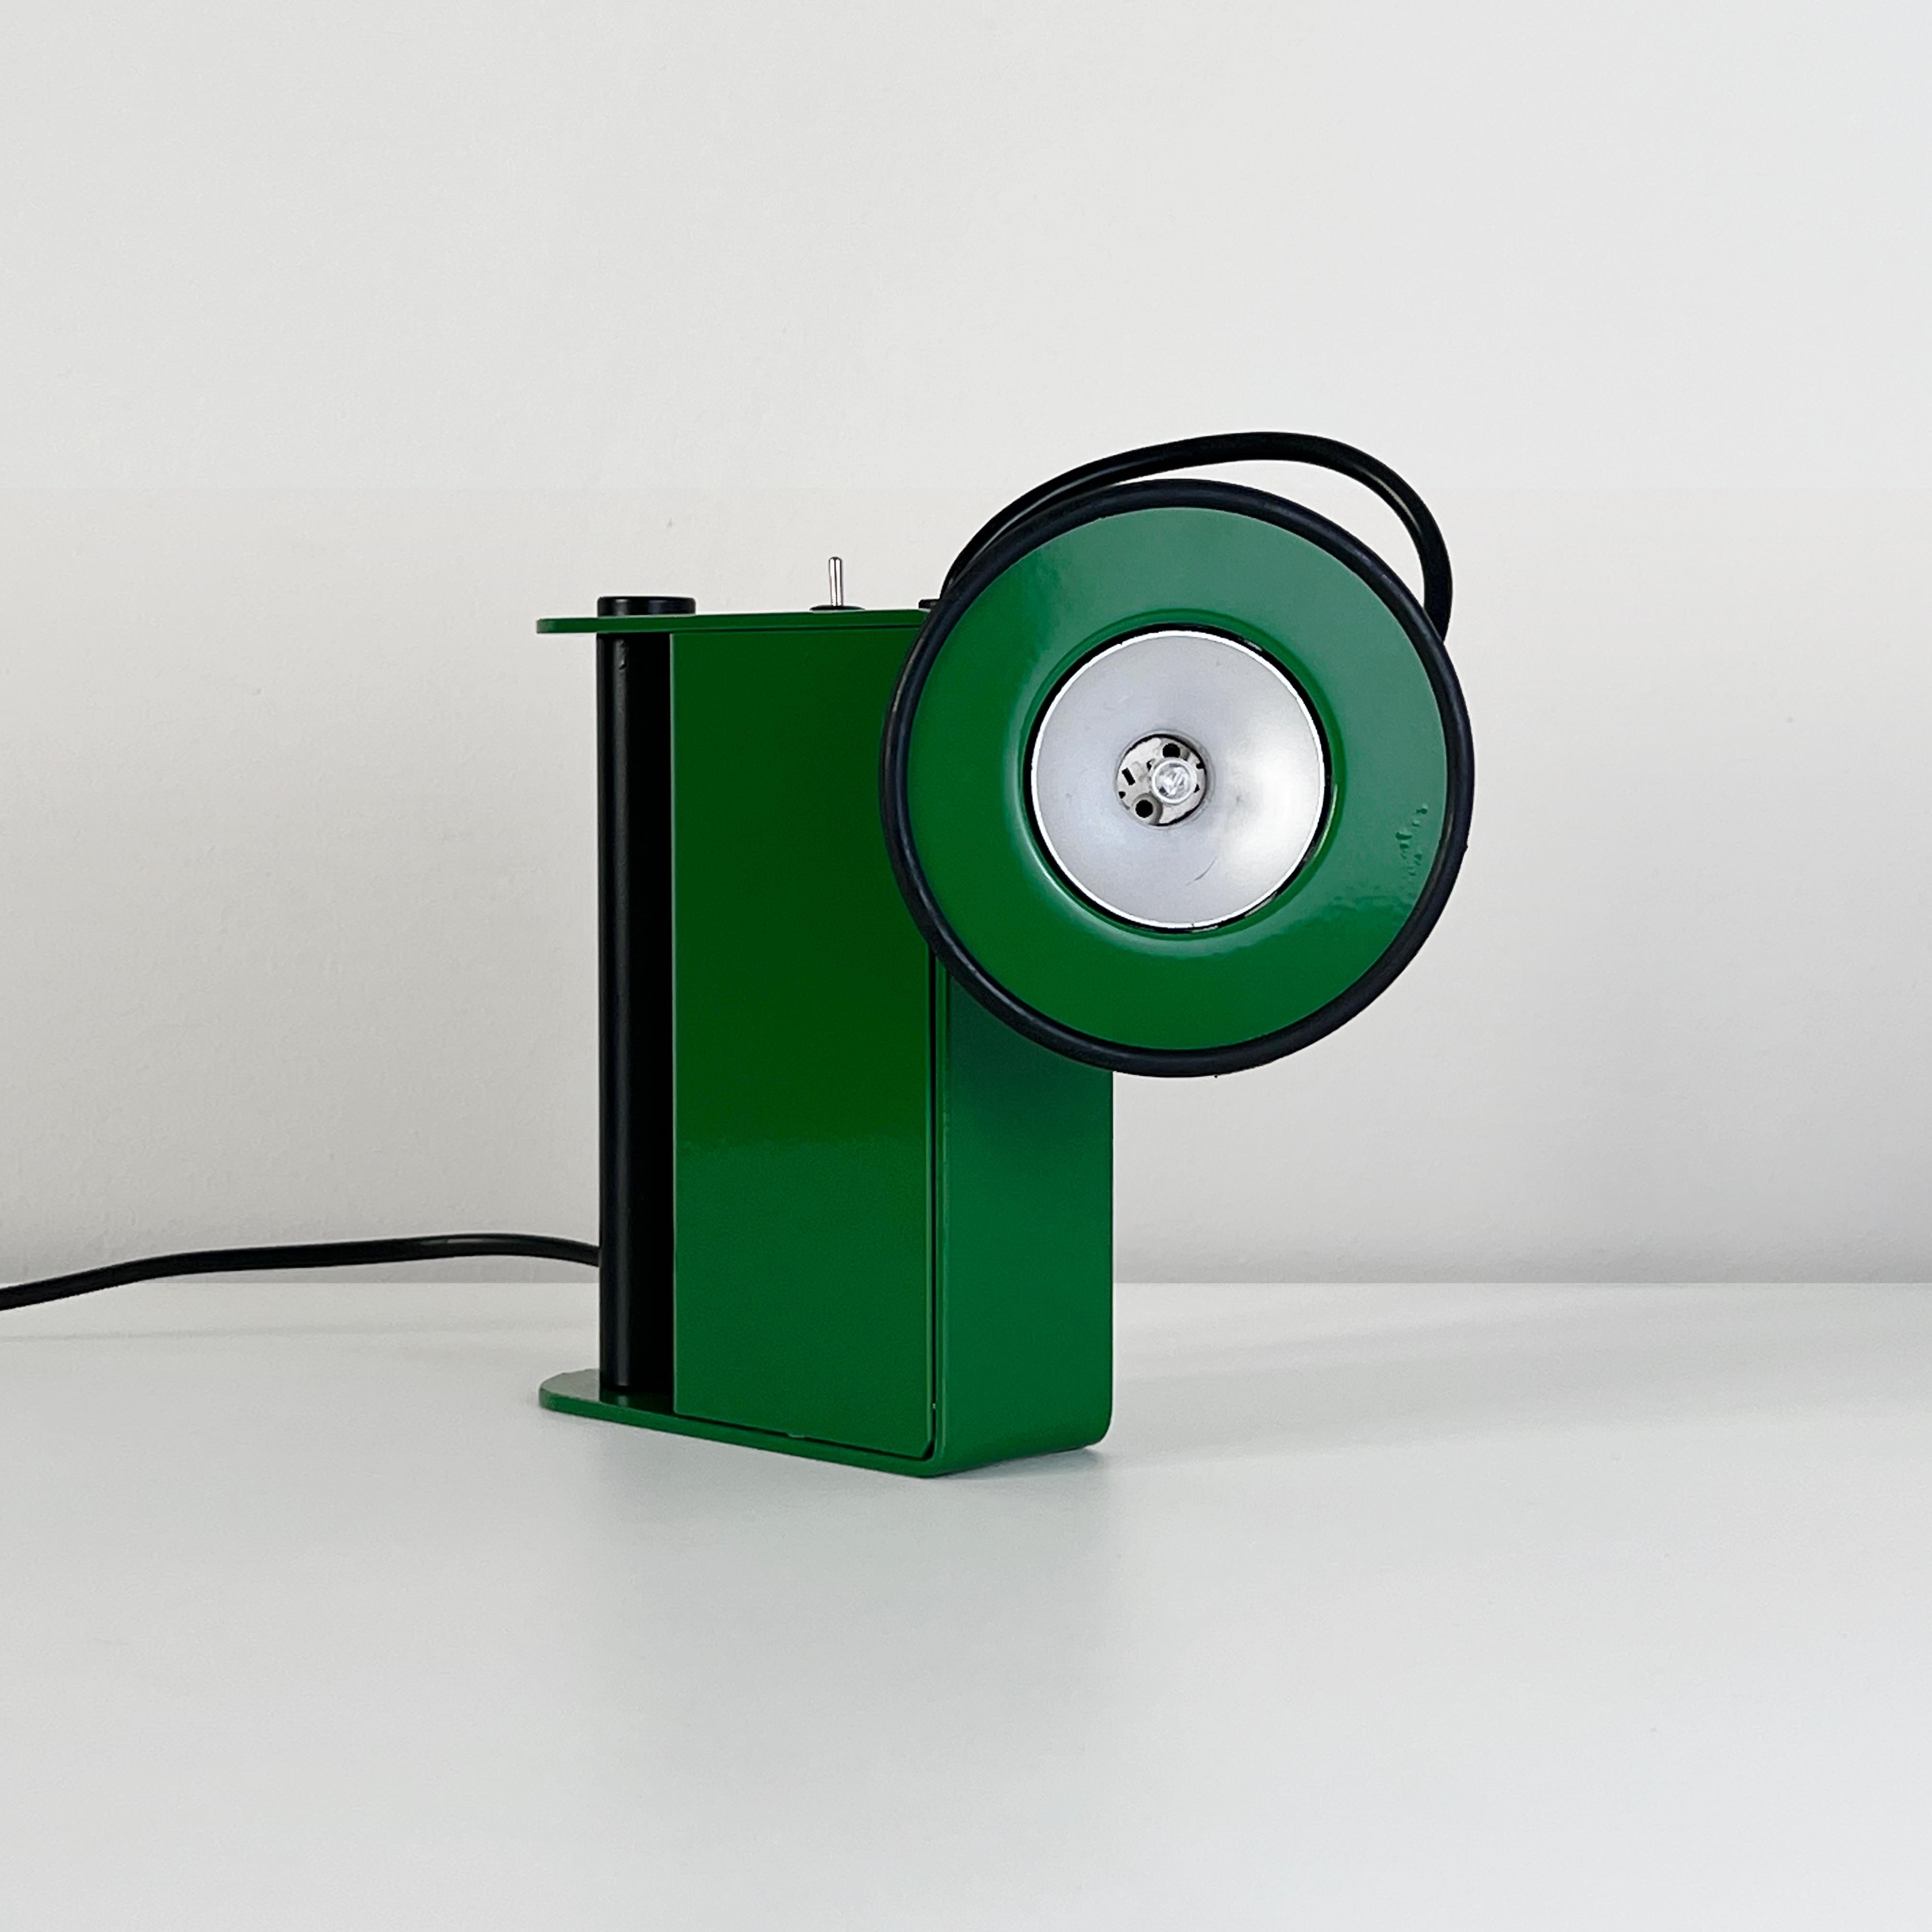 The Green Minibox table lamp, designed by the talented duo Gae Aulenti and Piero Castiglioni and manufactured by Stilnovo in 1980, is a true representation of post-modern, minimalistic, and technical design. This iconic lamp is a testament to the